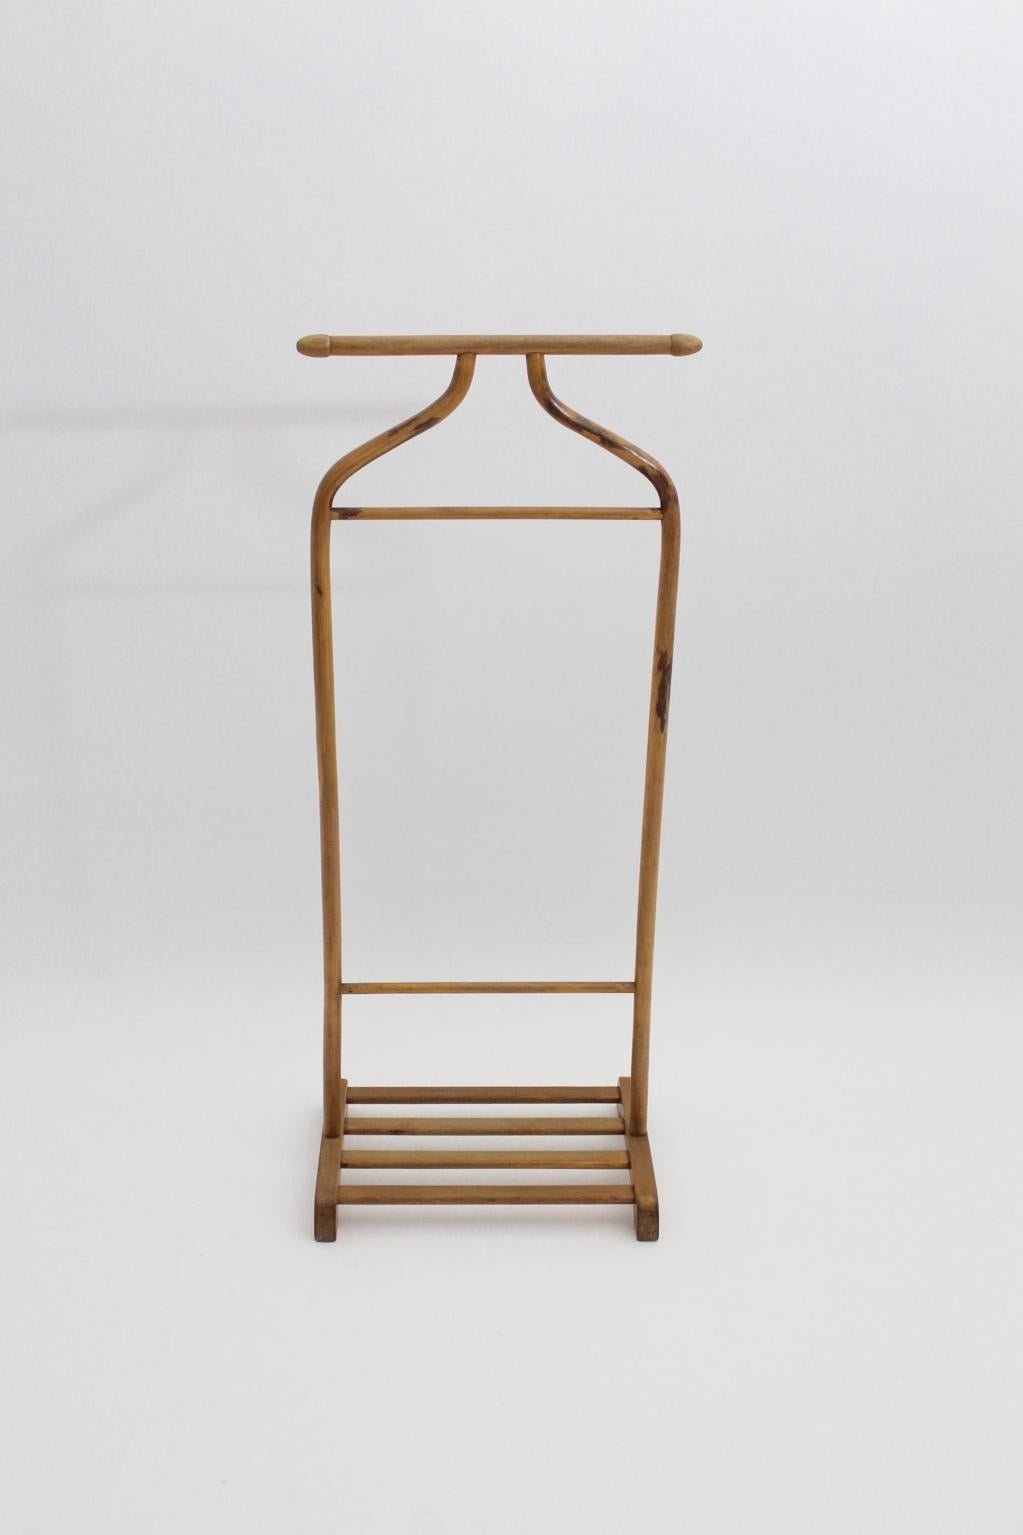 The elegant vintage beech valet or coat rack shows all features, what you are looking for.
Two racks and one reling for your clothes and a parking space with wooden slats for your shoes.
Furthermore the valet was designed and executed by Thonet